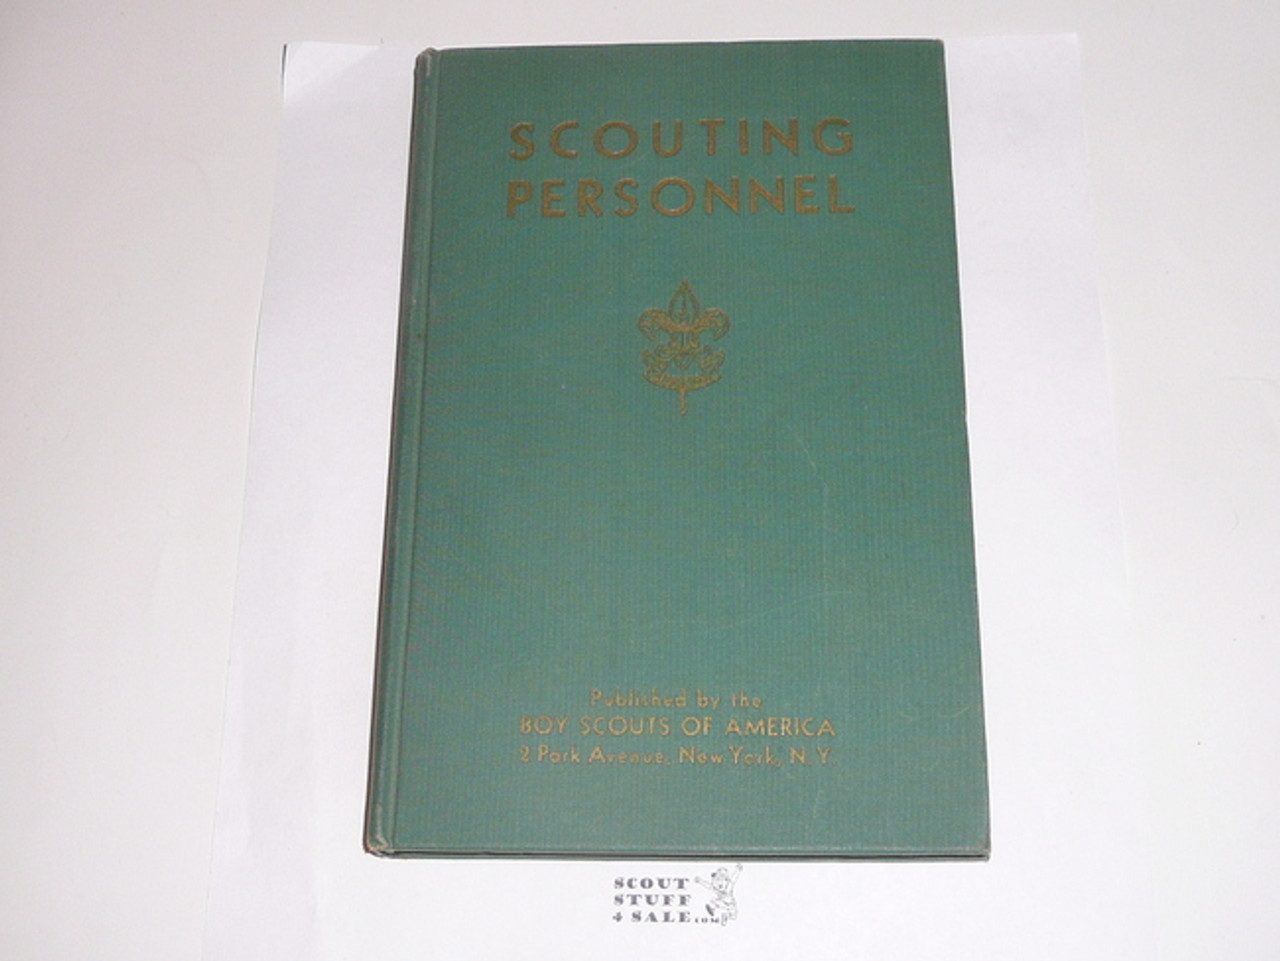 1937 Scouting Personnel, A manual of Human Relationships